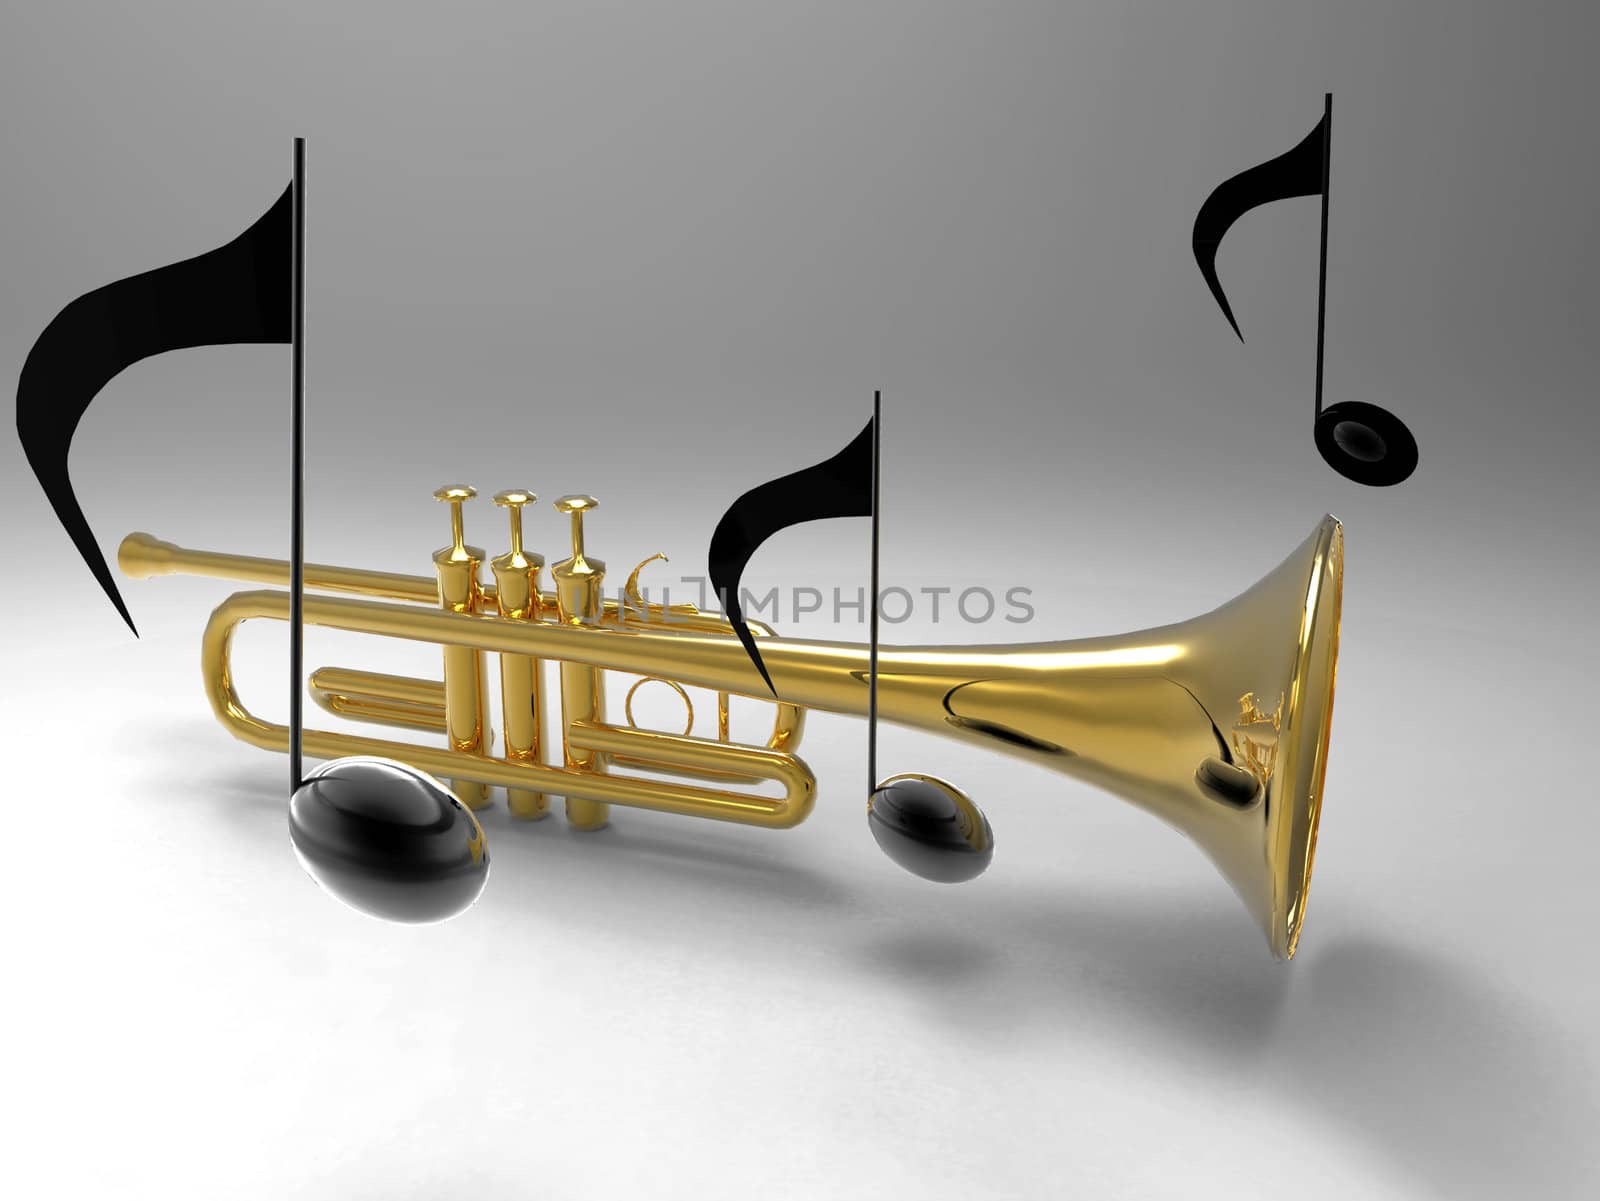 the trumpet and notes by njaj